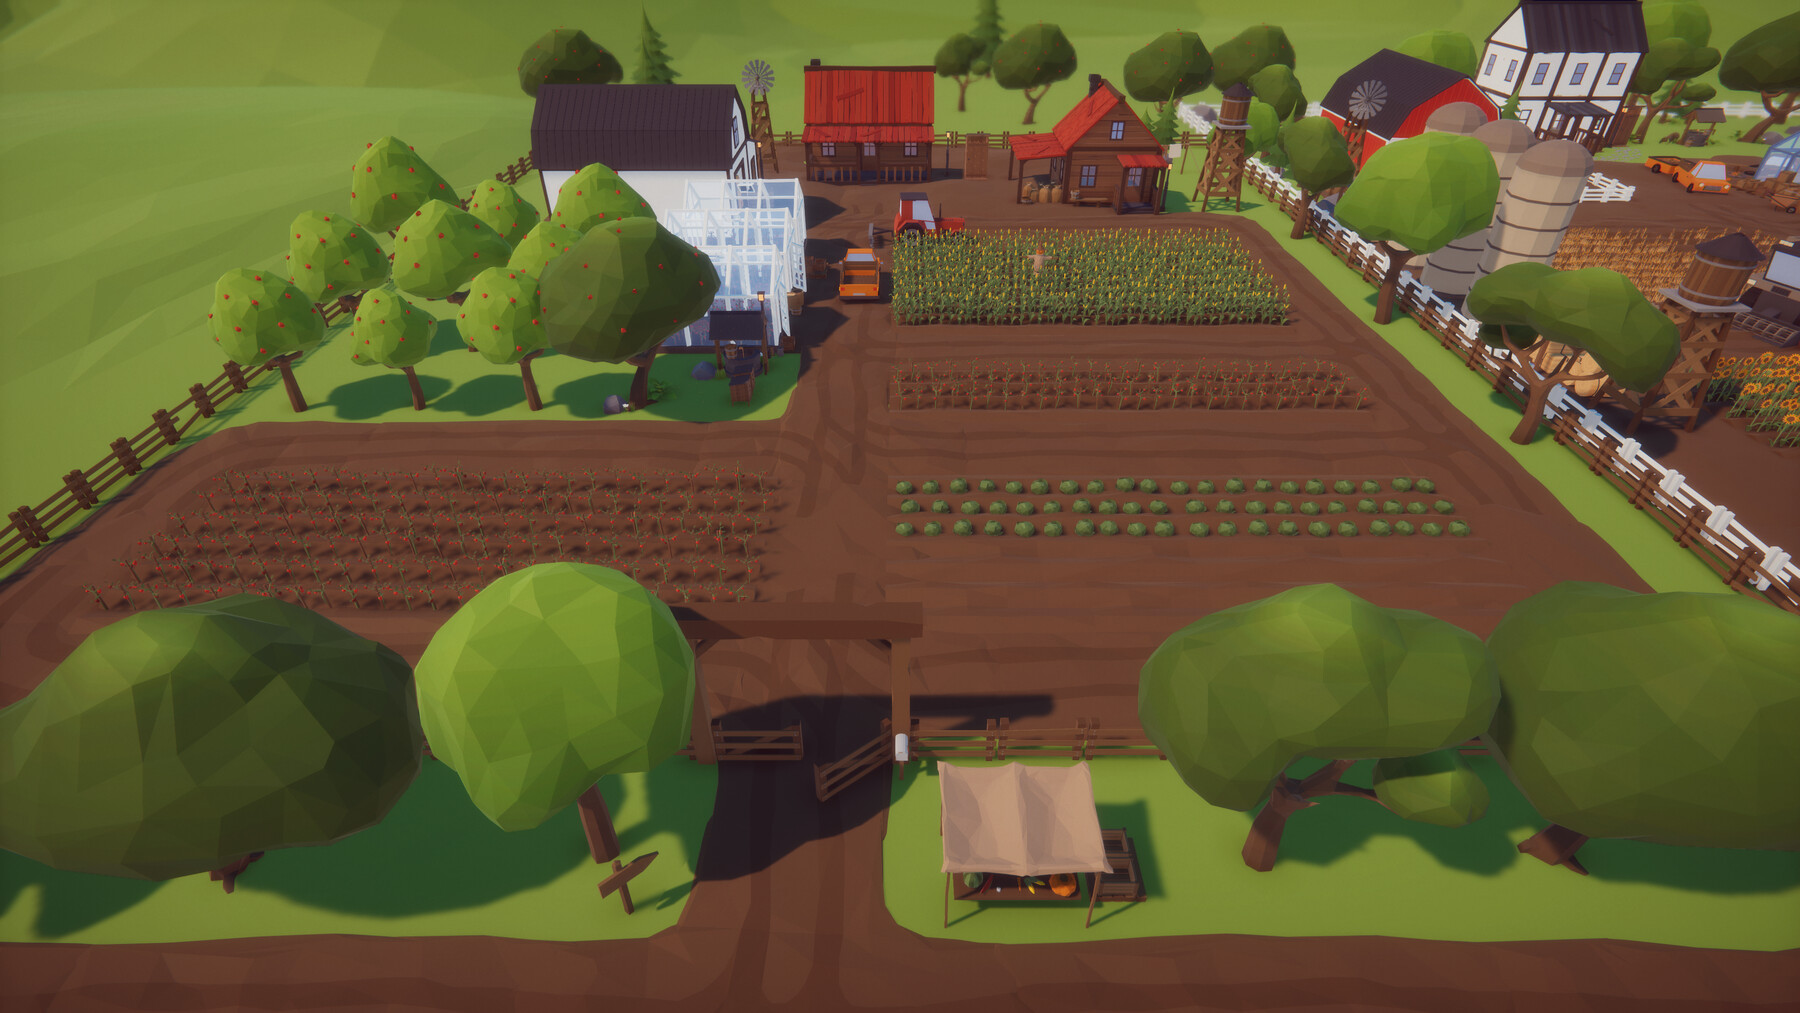 ArtStation - Low Poly Farm Pack - Asset for Unity 3D, Map and Models ...